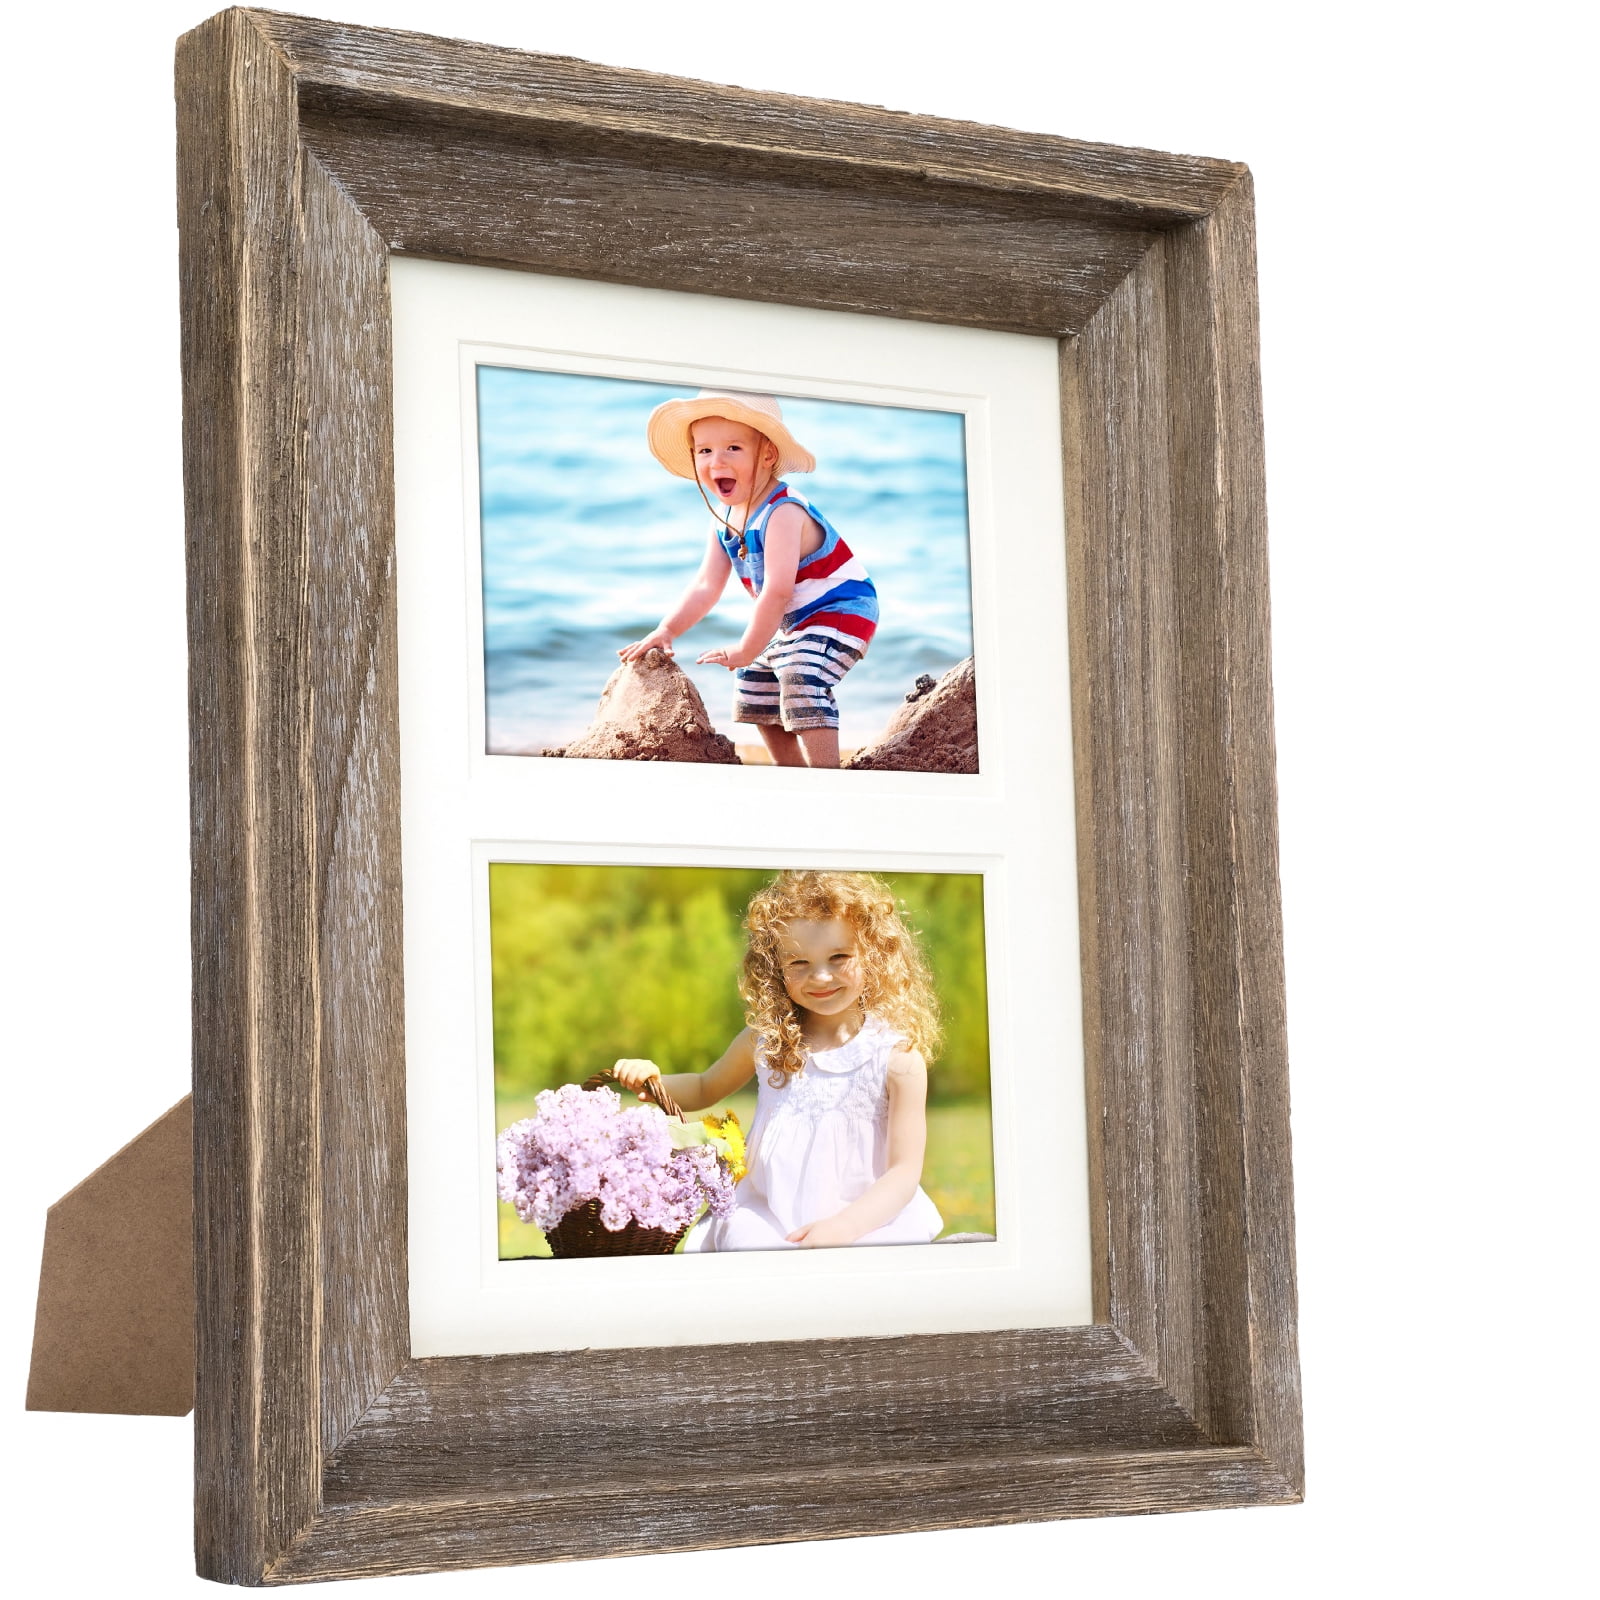 Brushed Silver Finish Photo/Picture Frame suitable for 7x5"/5x7" Prints 